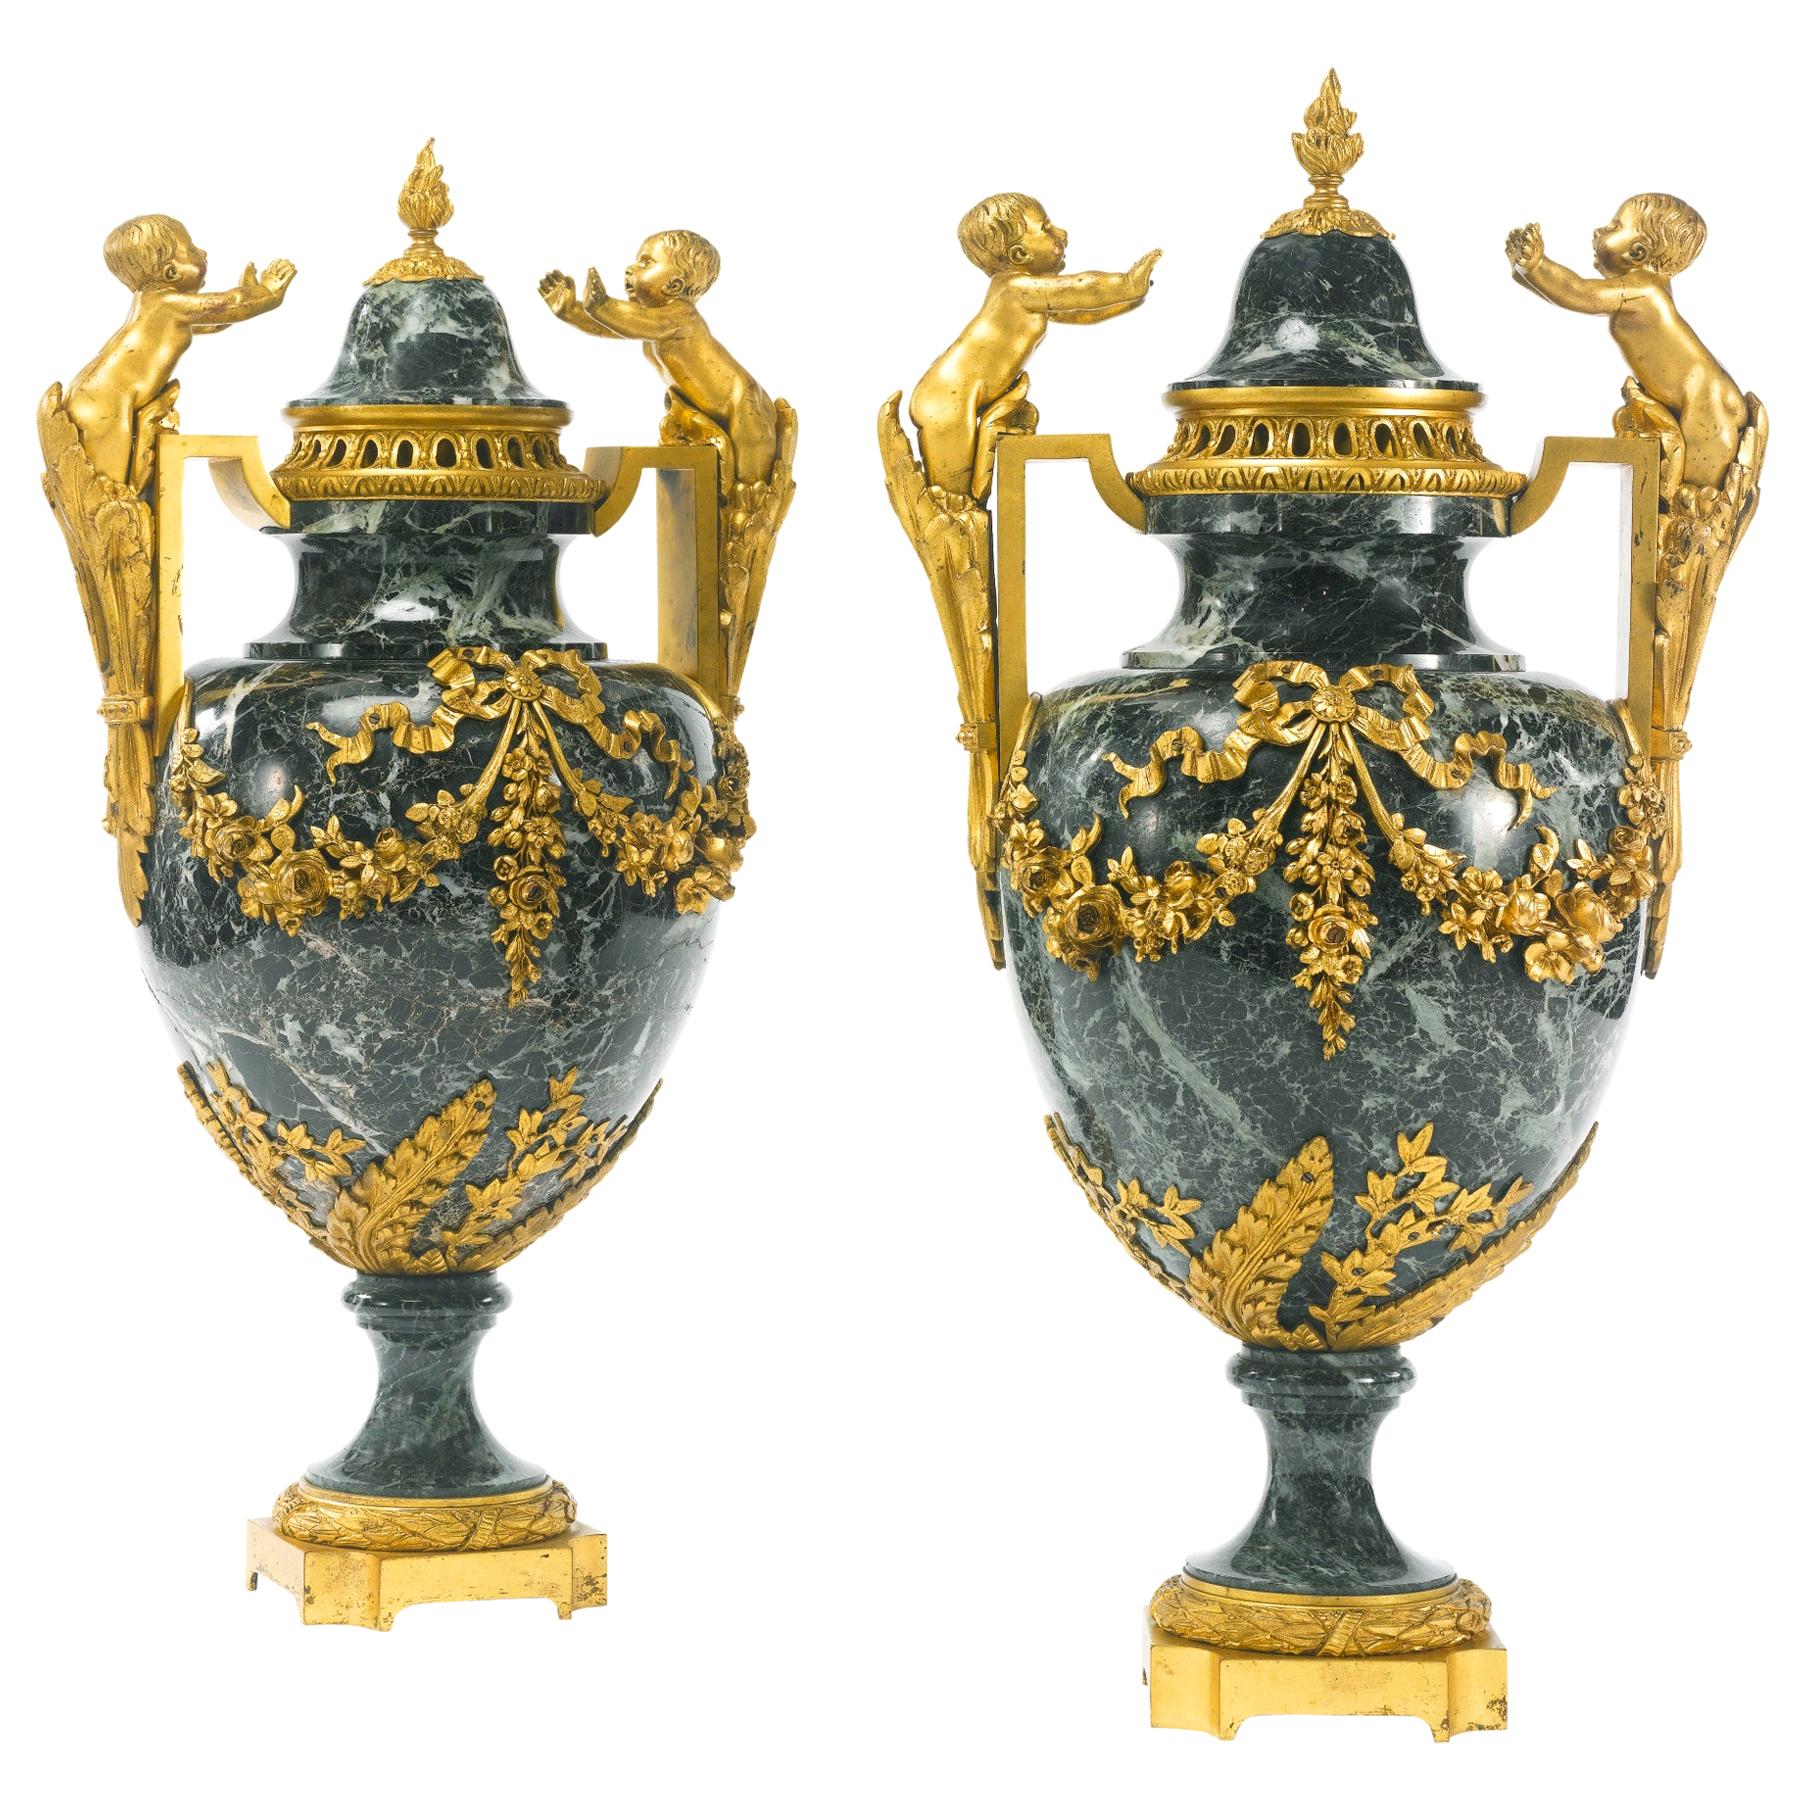 19th Century Pair of Louis XVI style Ormolu Mounted Patricia Green Marble Urns